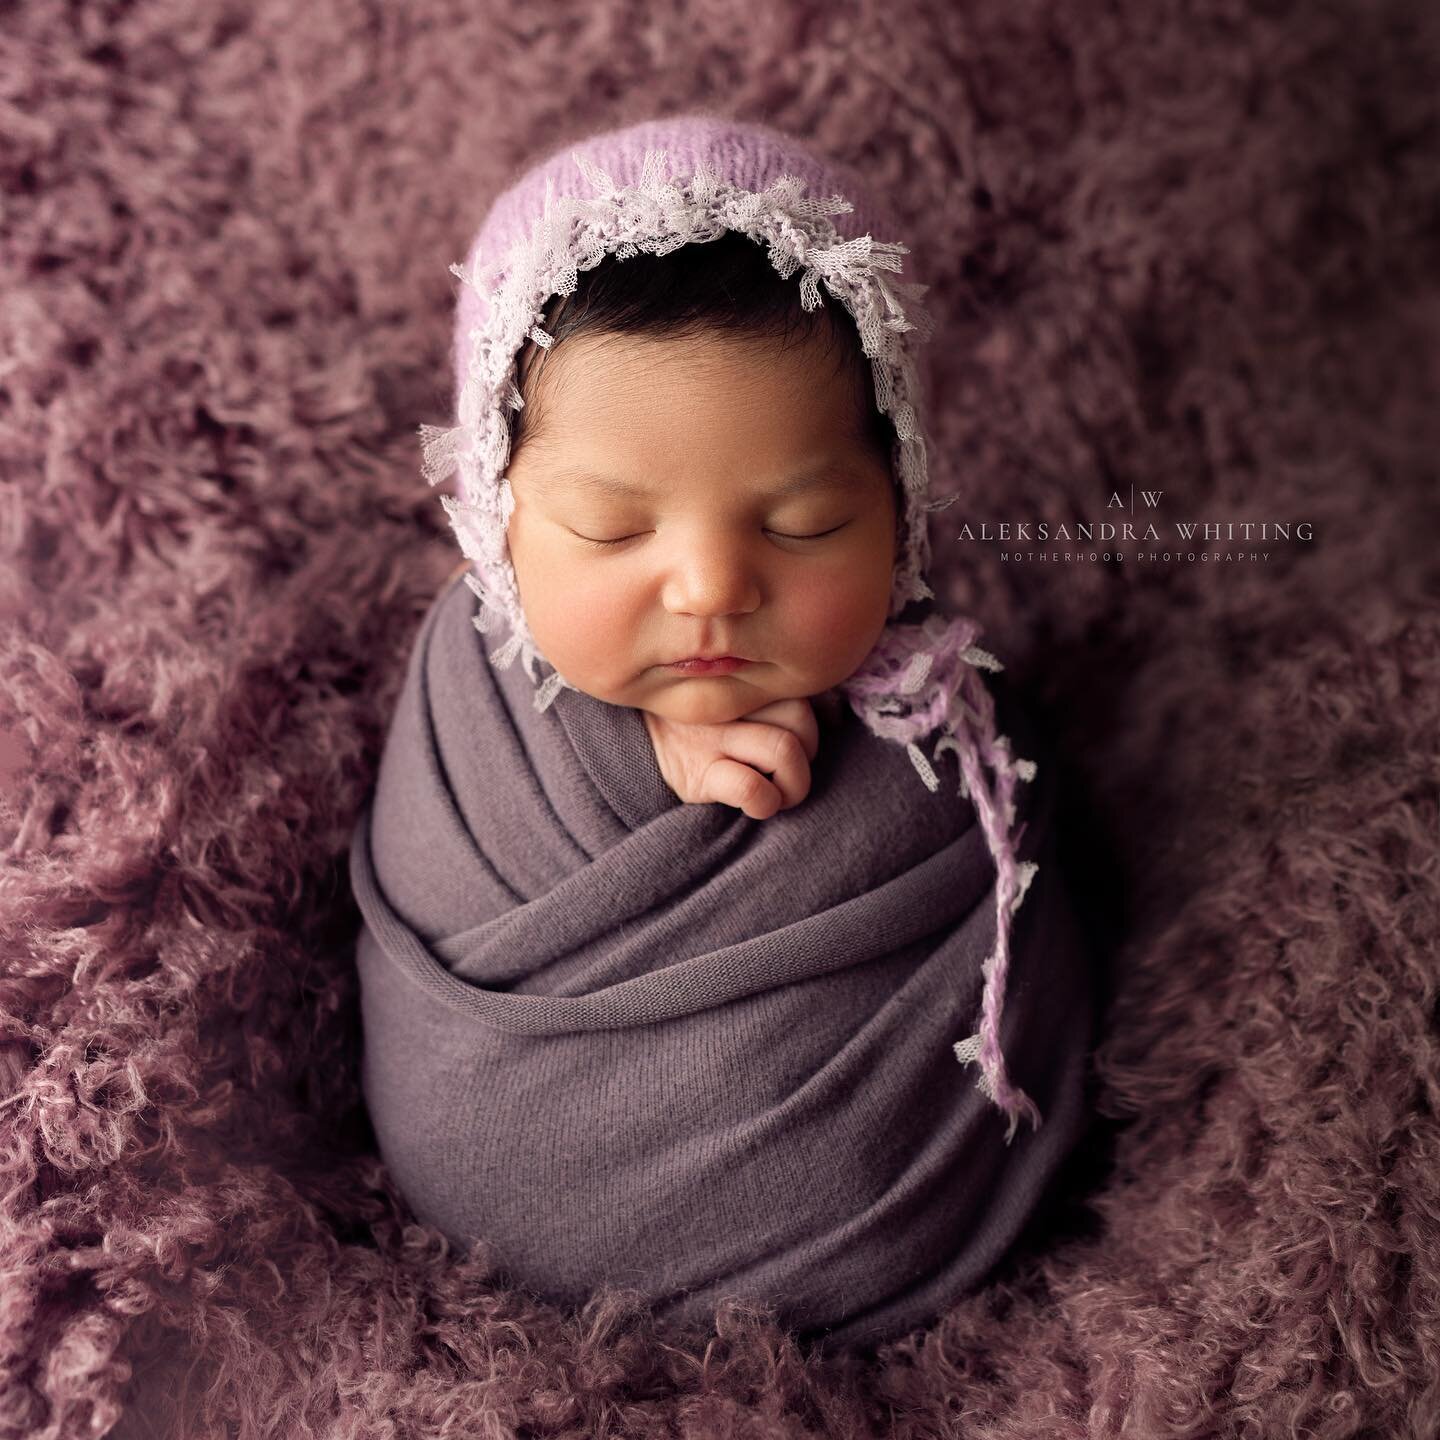 Ok!!! One more for today and maaaaaybe I&rsquo;ll take the weekend off social media? Maybe... Look at this beautiful baby girl in the meantime, I got a few of her images edited today and couldn&rsquo;t help but think she looks like a perfect little d